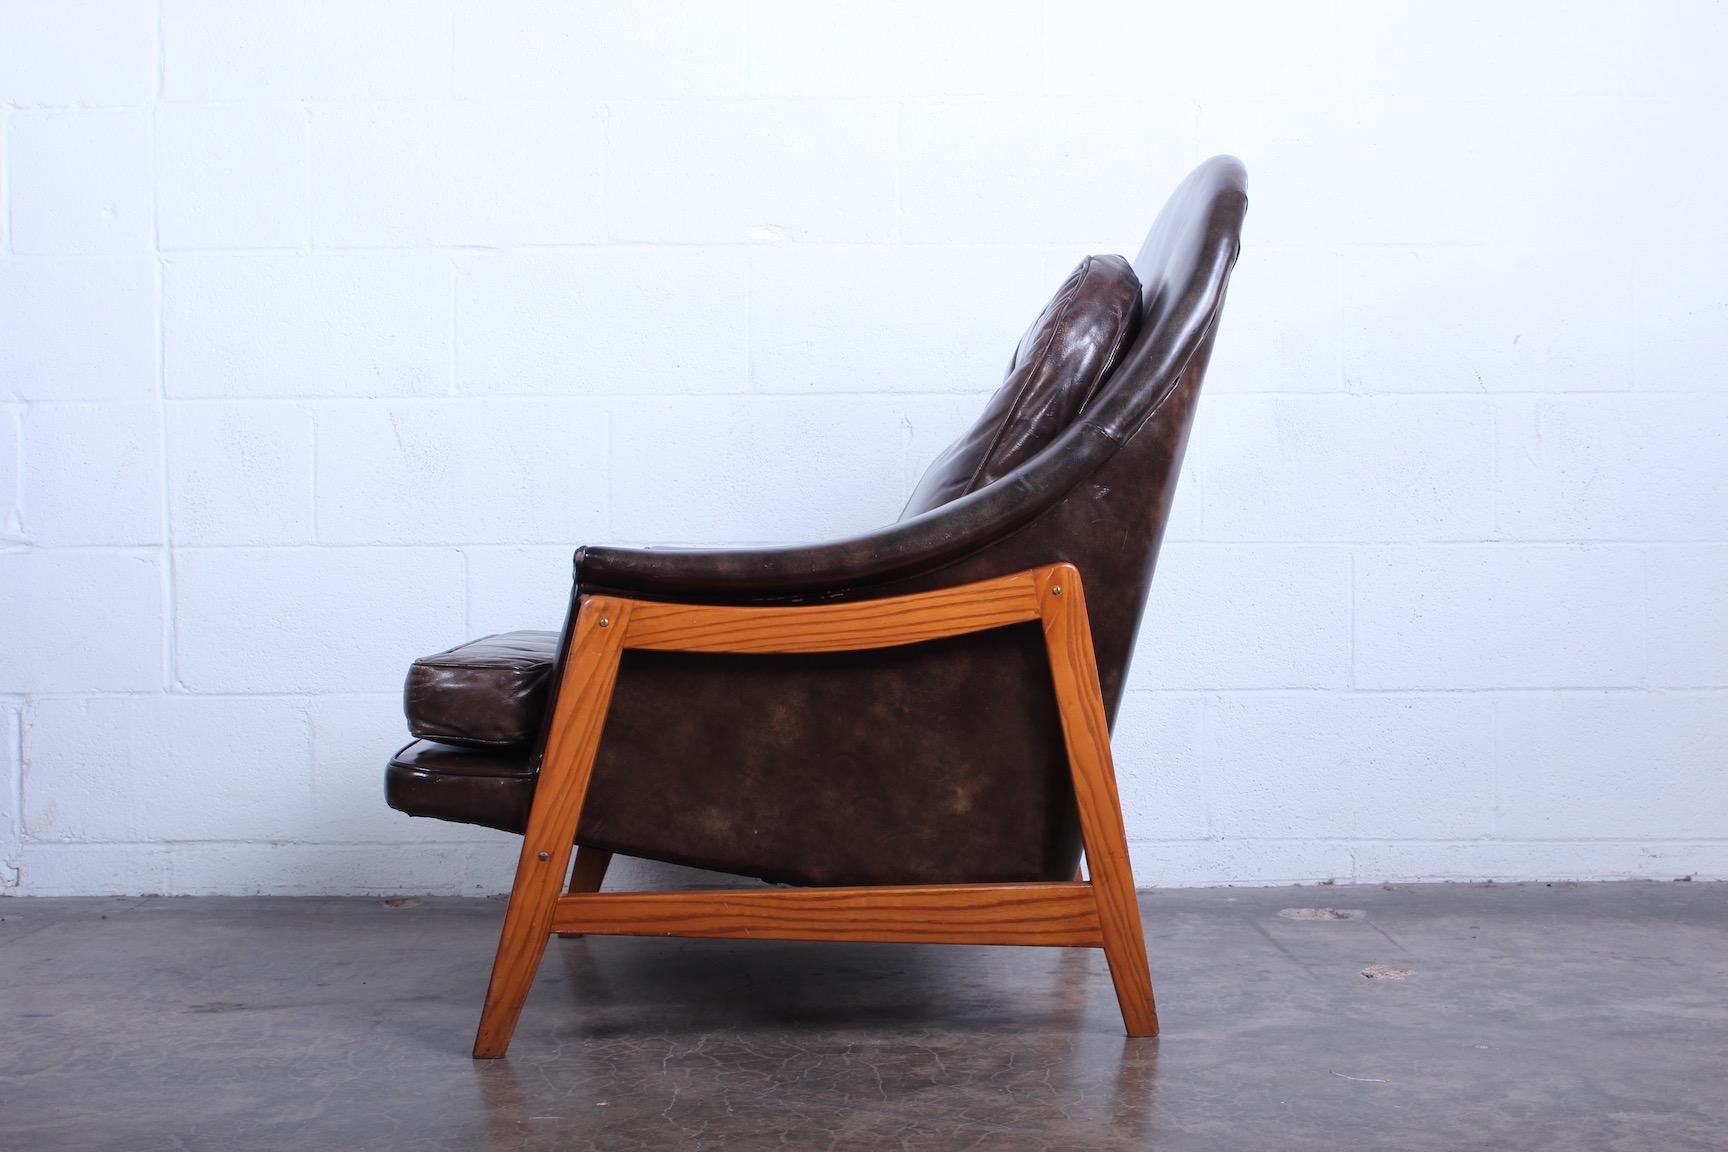 Lounge chair by Edward Wormley for Dunbar in original leather.